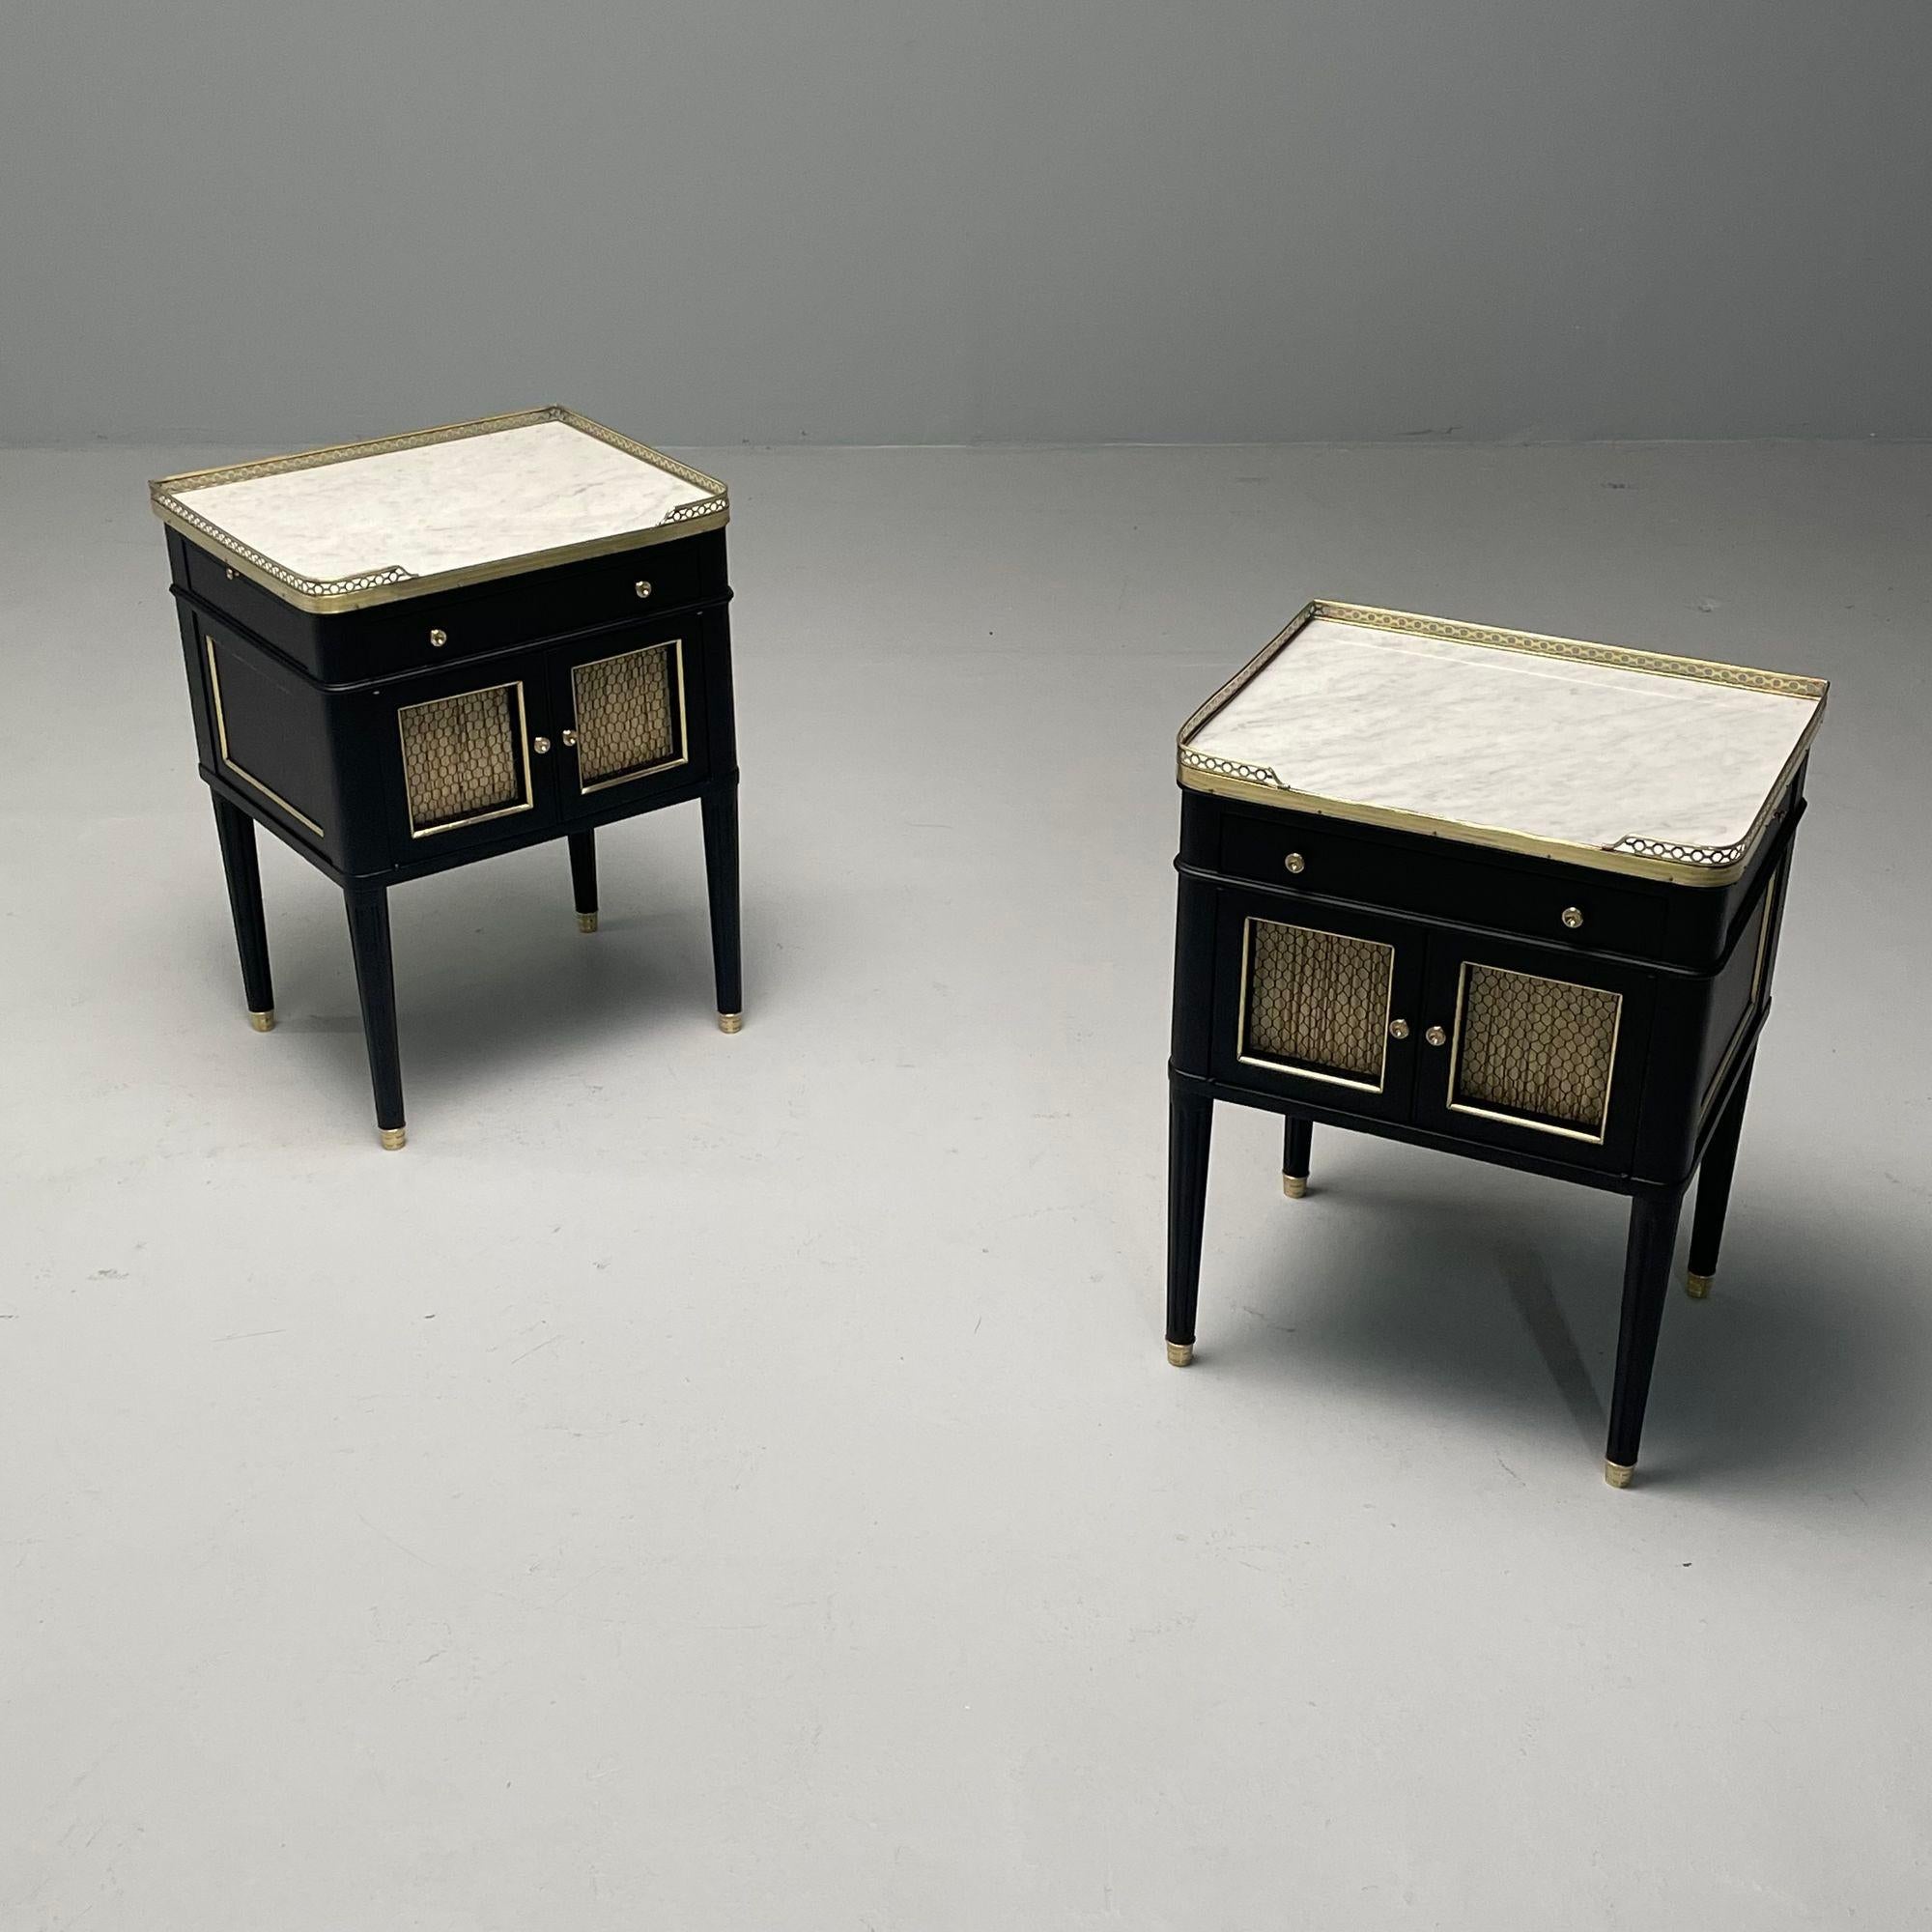 Maison Jansen Style, Hollywood Regency, Nightstands, Ebony, Oak, Marble, 1950s

Pair of fully restored nightstands, end or side tables, newly finished in a matte ebony. Each piece has a brass galleried white marble top above a single drawer and pull